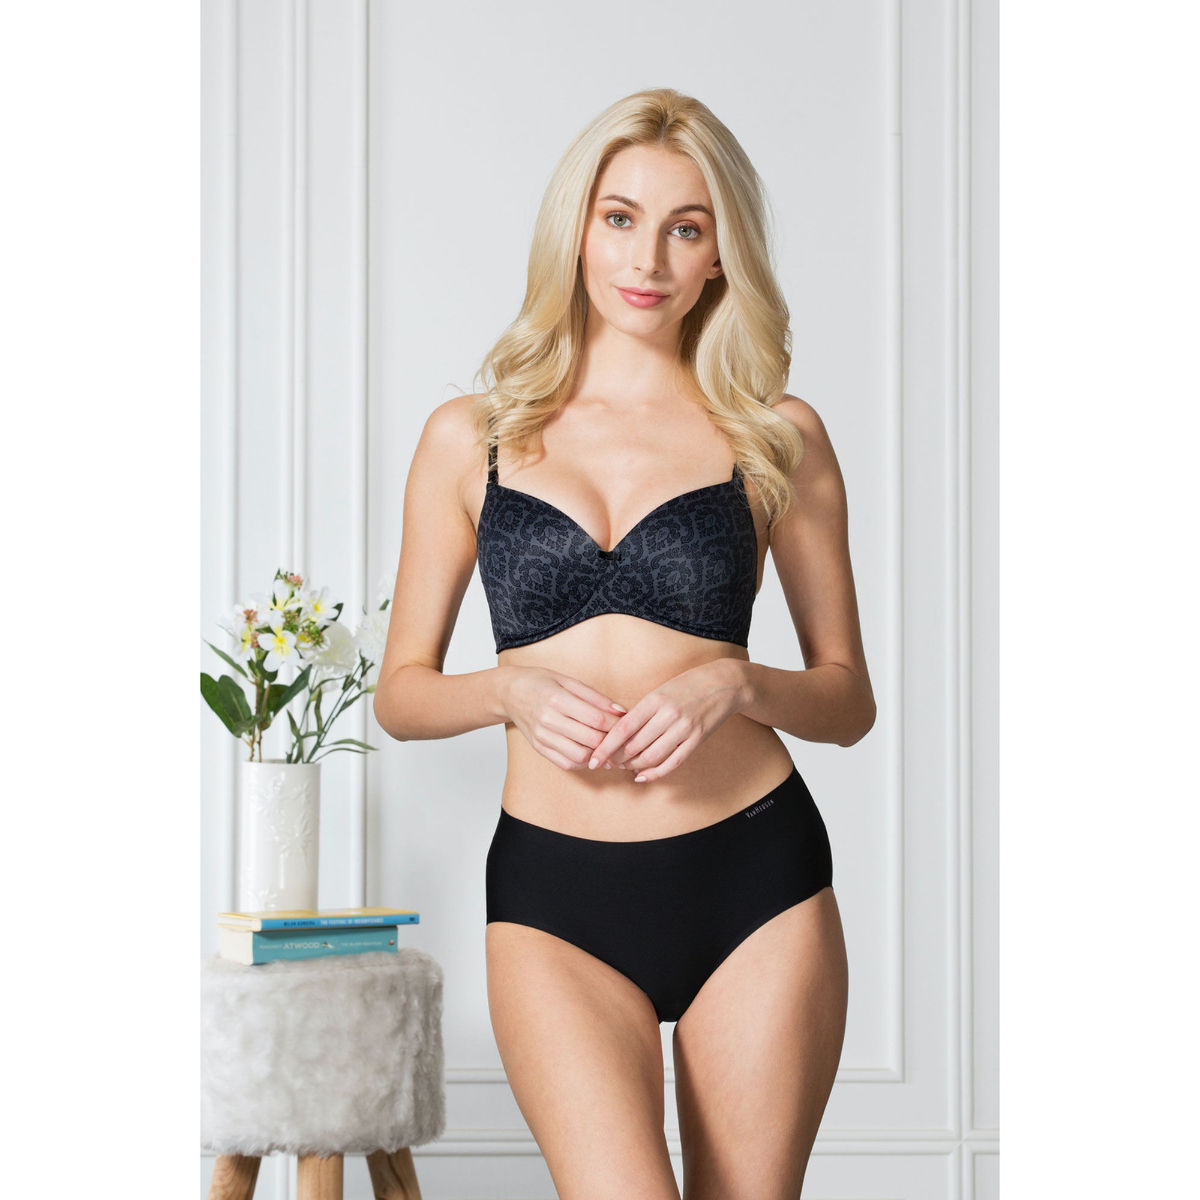 Van Heusen Intimates Panty, Women InvisiLite Hipster Panty - No Visible  Panty Line and Quick Dry for Women at Vanheusenintimates